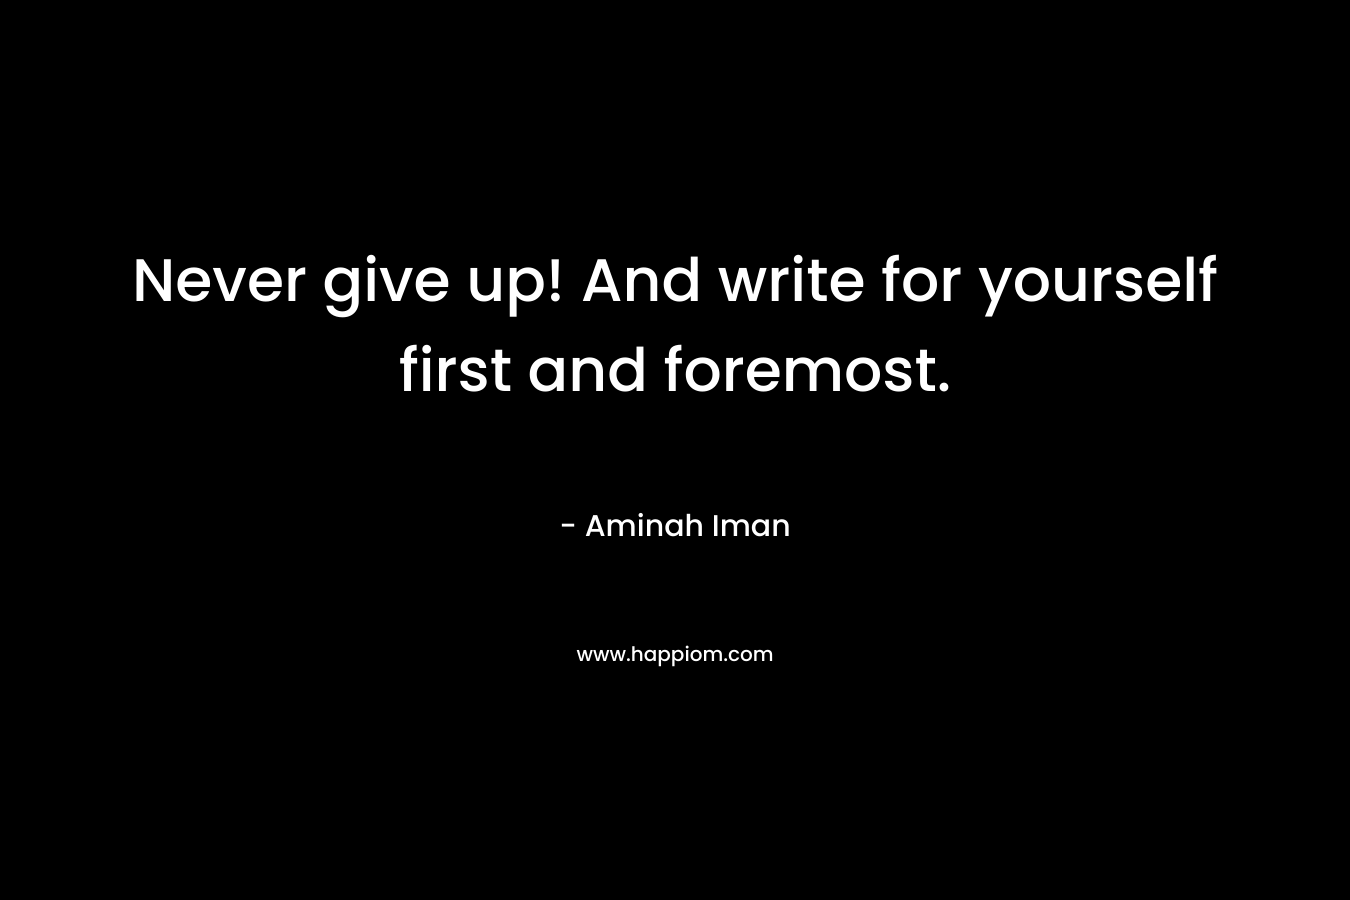 Never give up! And write for yourself first and foremost.